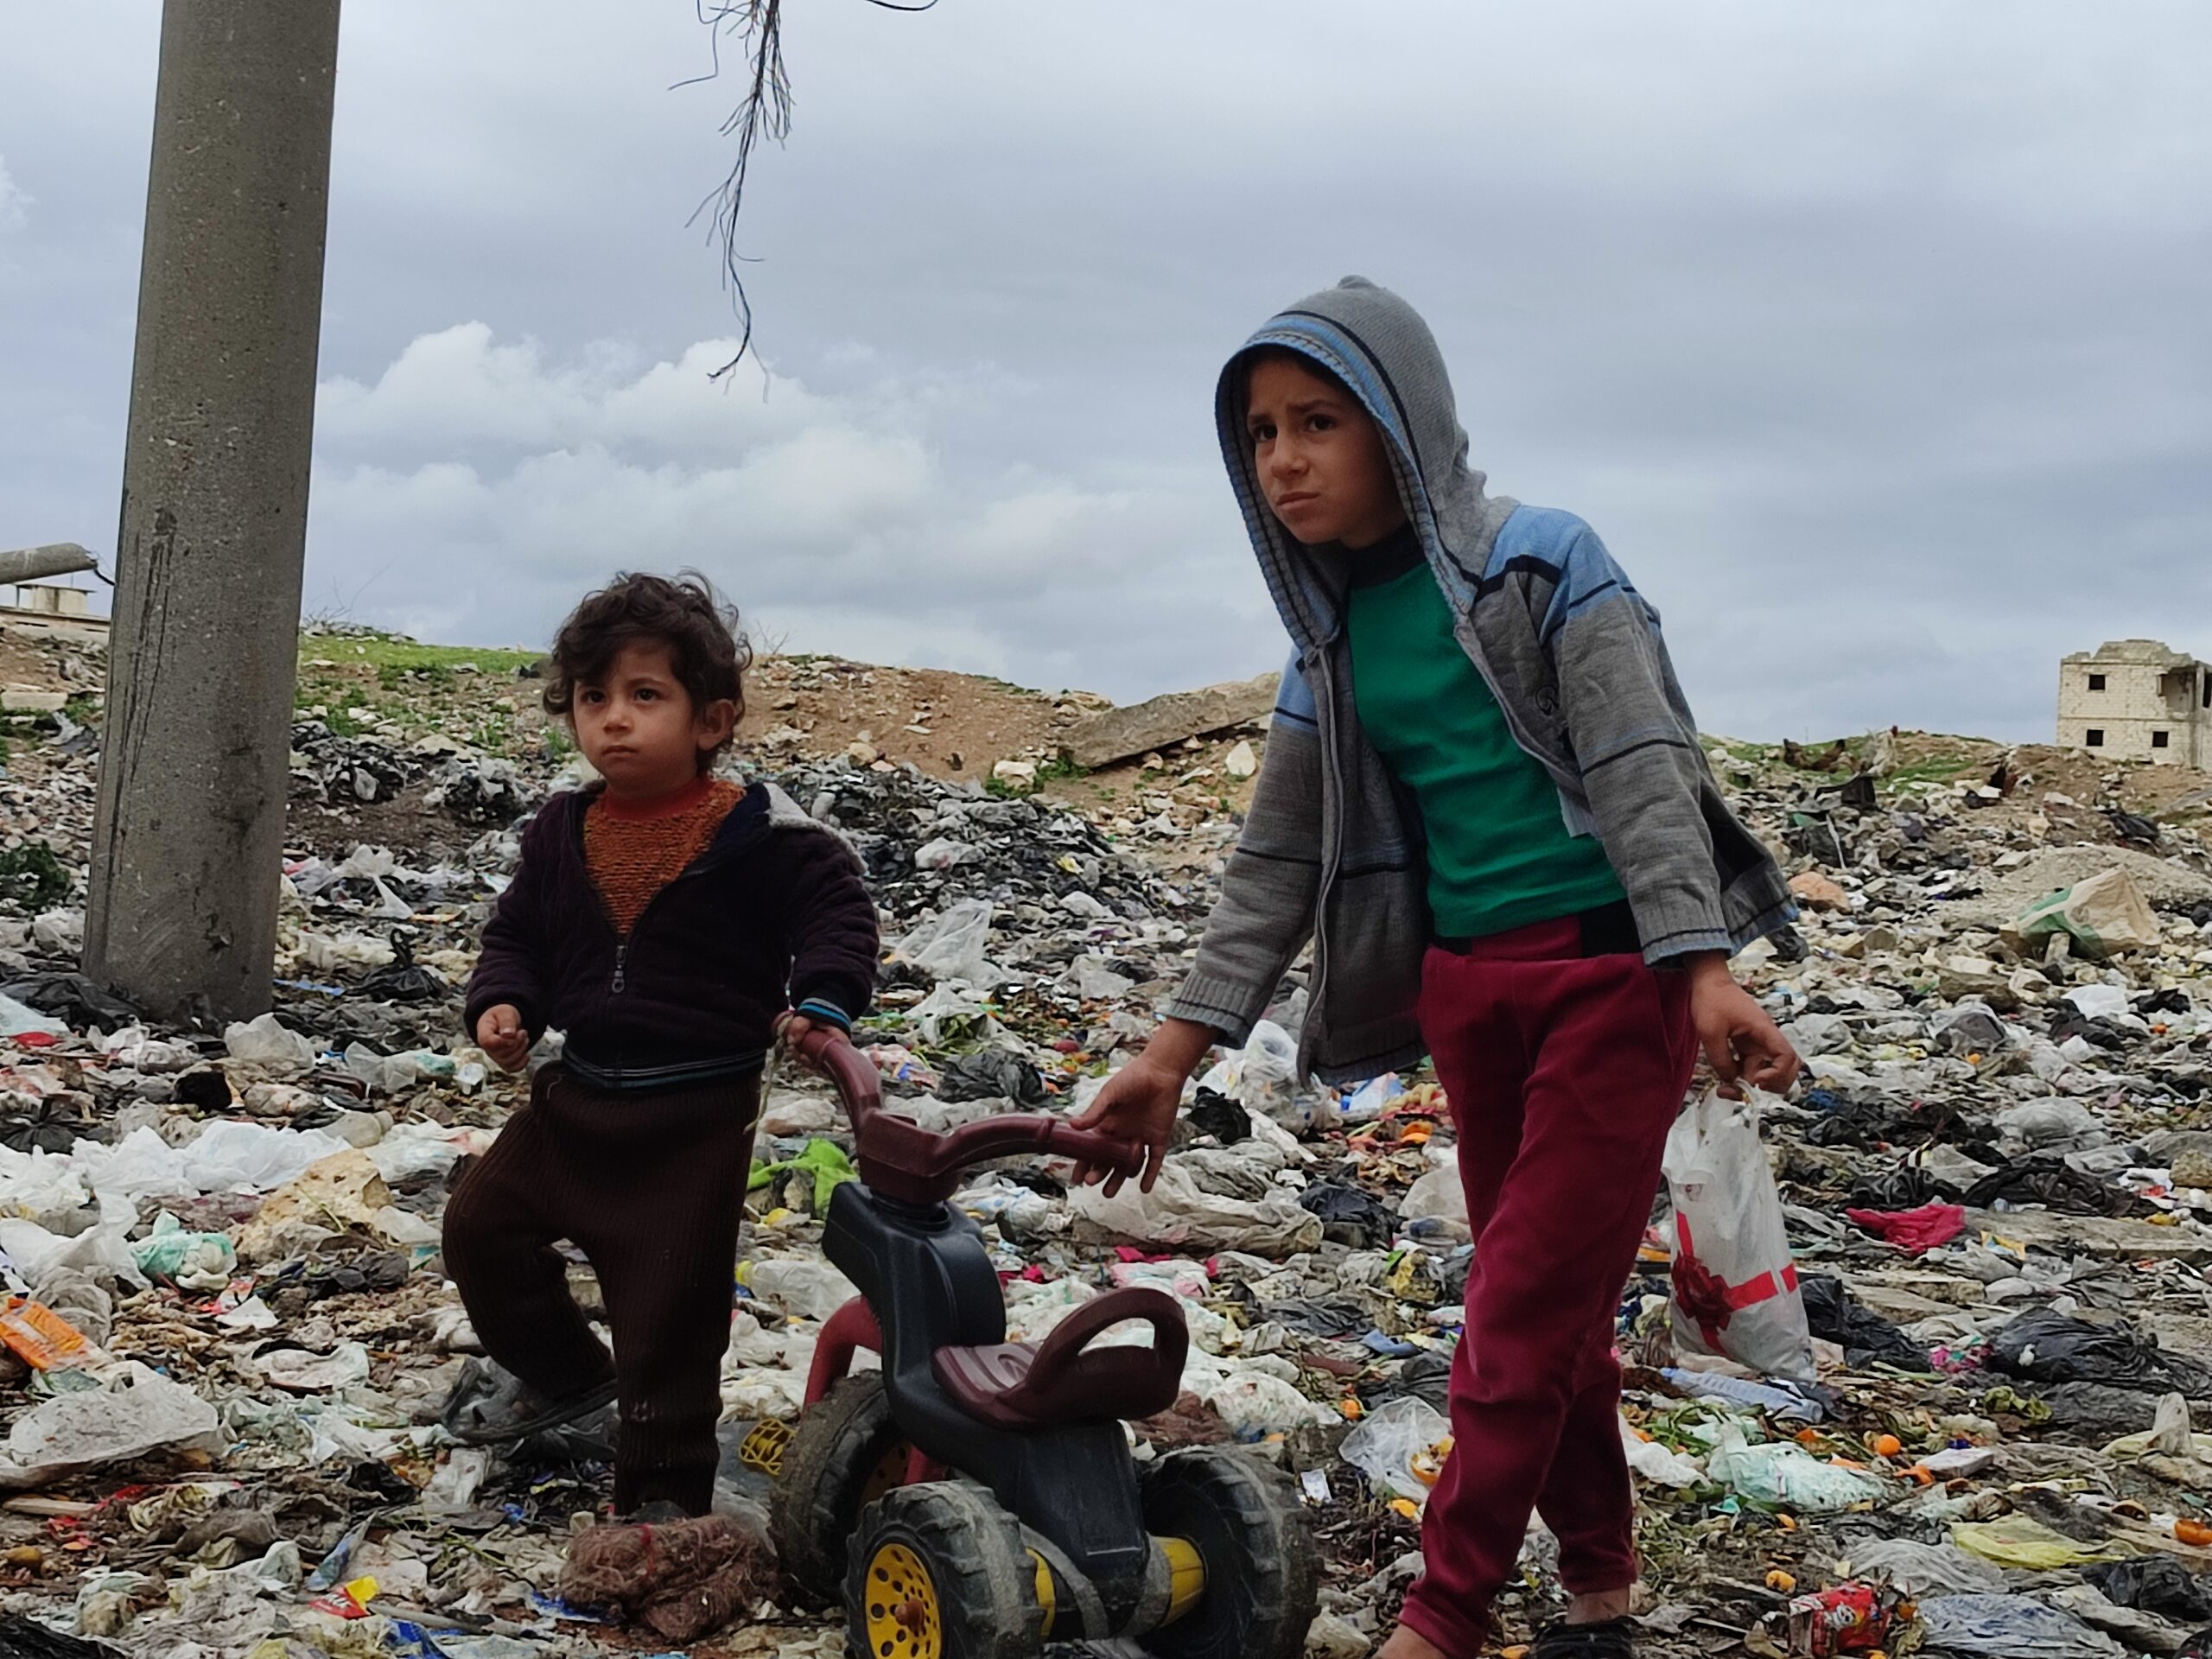 young boys among rubble and garbage